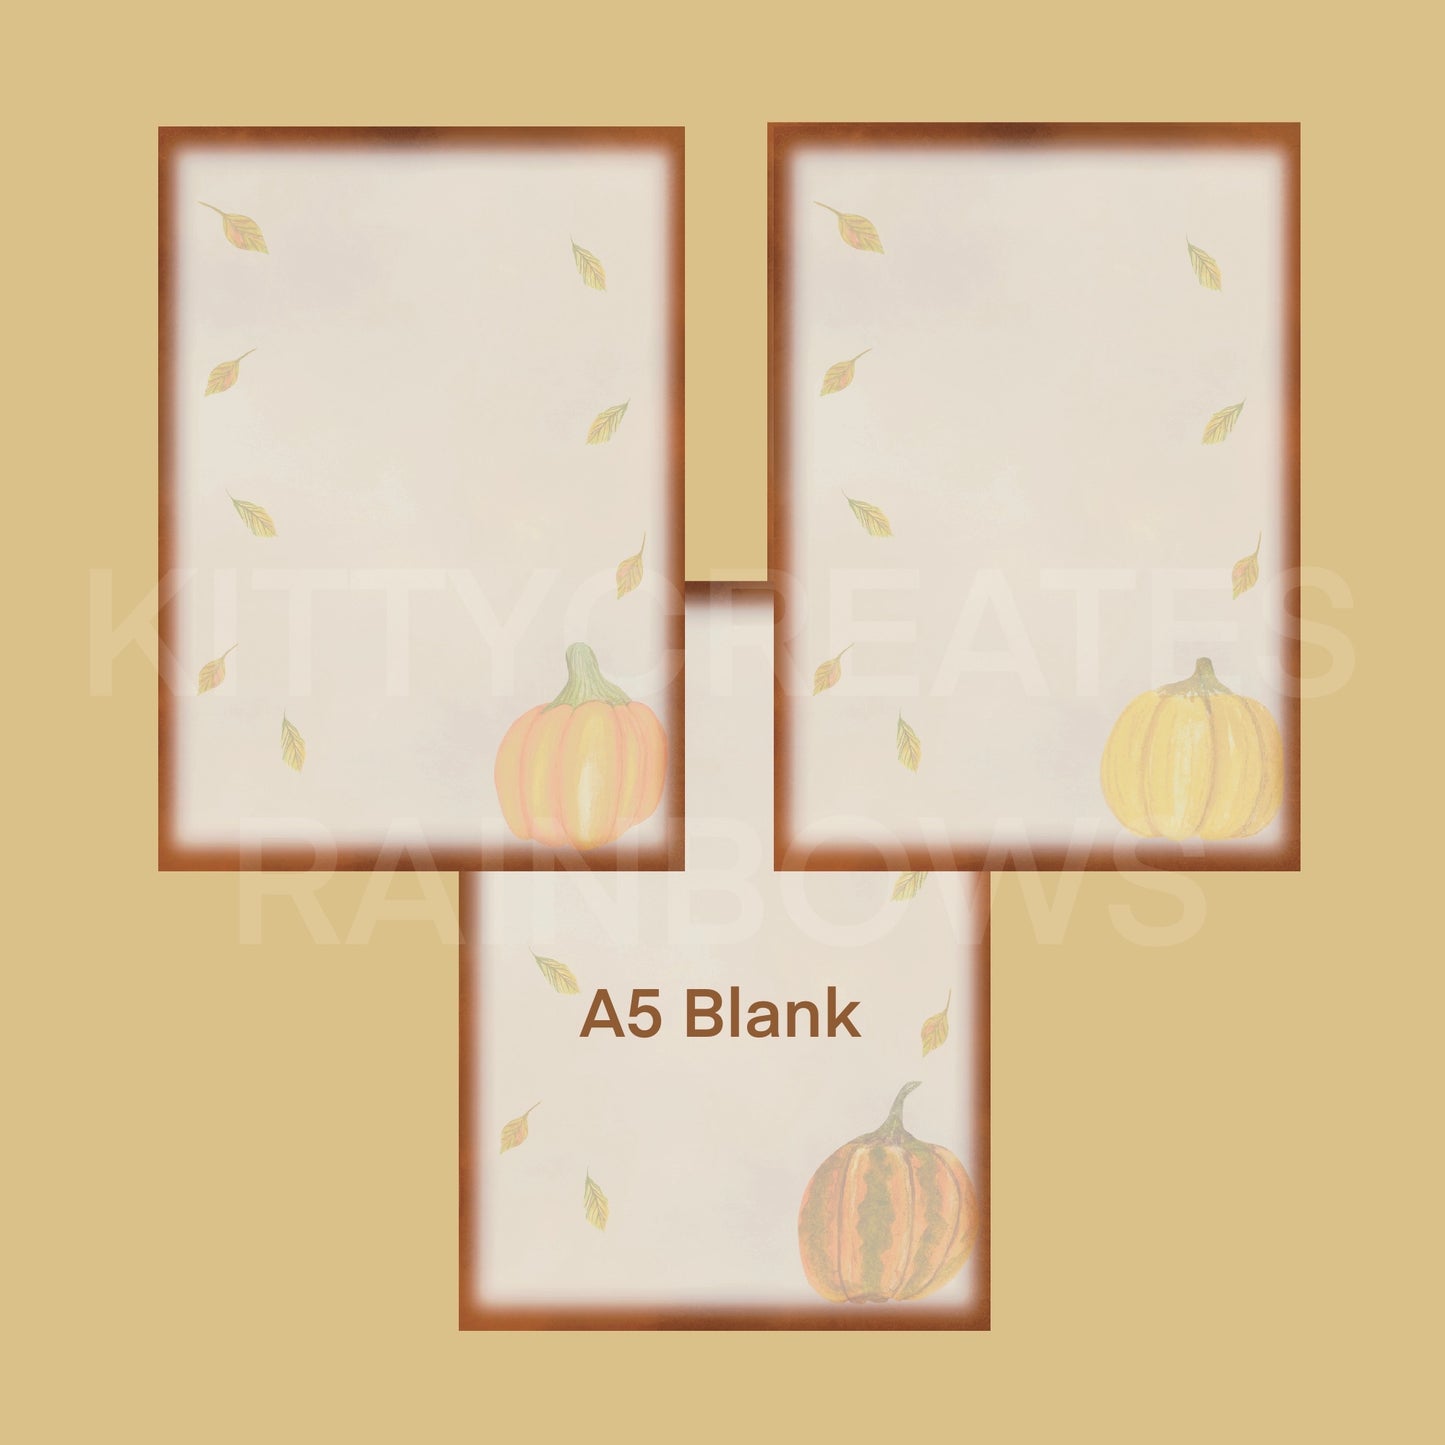 3 images of Fall Forage Pumpkin Writing Papers on a light brown yellow background and a white watermark saying Kitty Creates Rainbows. Text on bottom of image also says in brown text A5 Blank